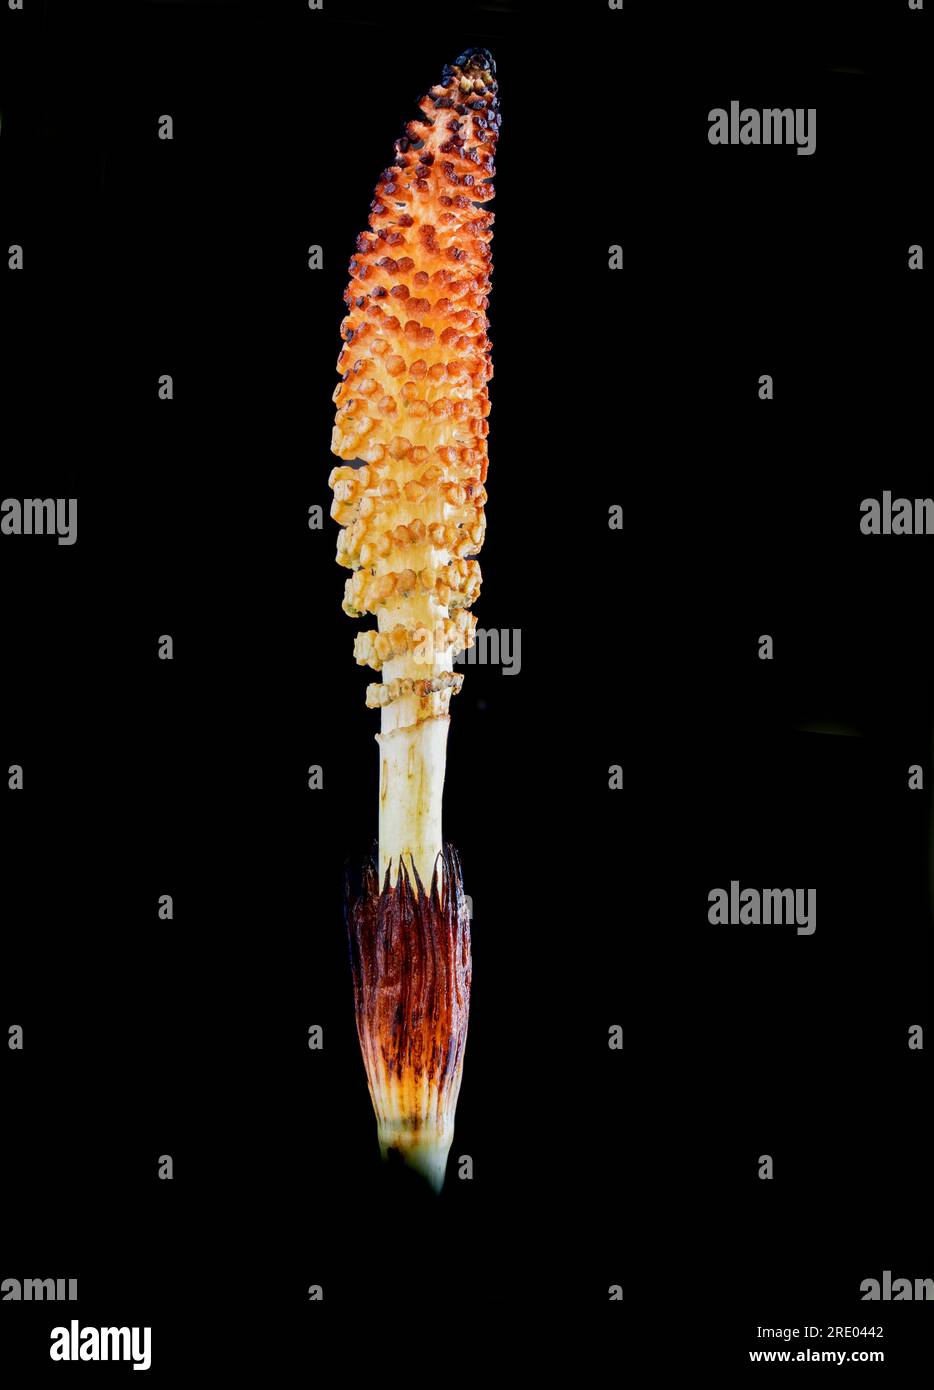 great horsetail, northern giant horsetail (Equisetum telmateia, Equisetum telmateja, Equisetum maximum), cone against black background, Netherlands Stock Photo